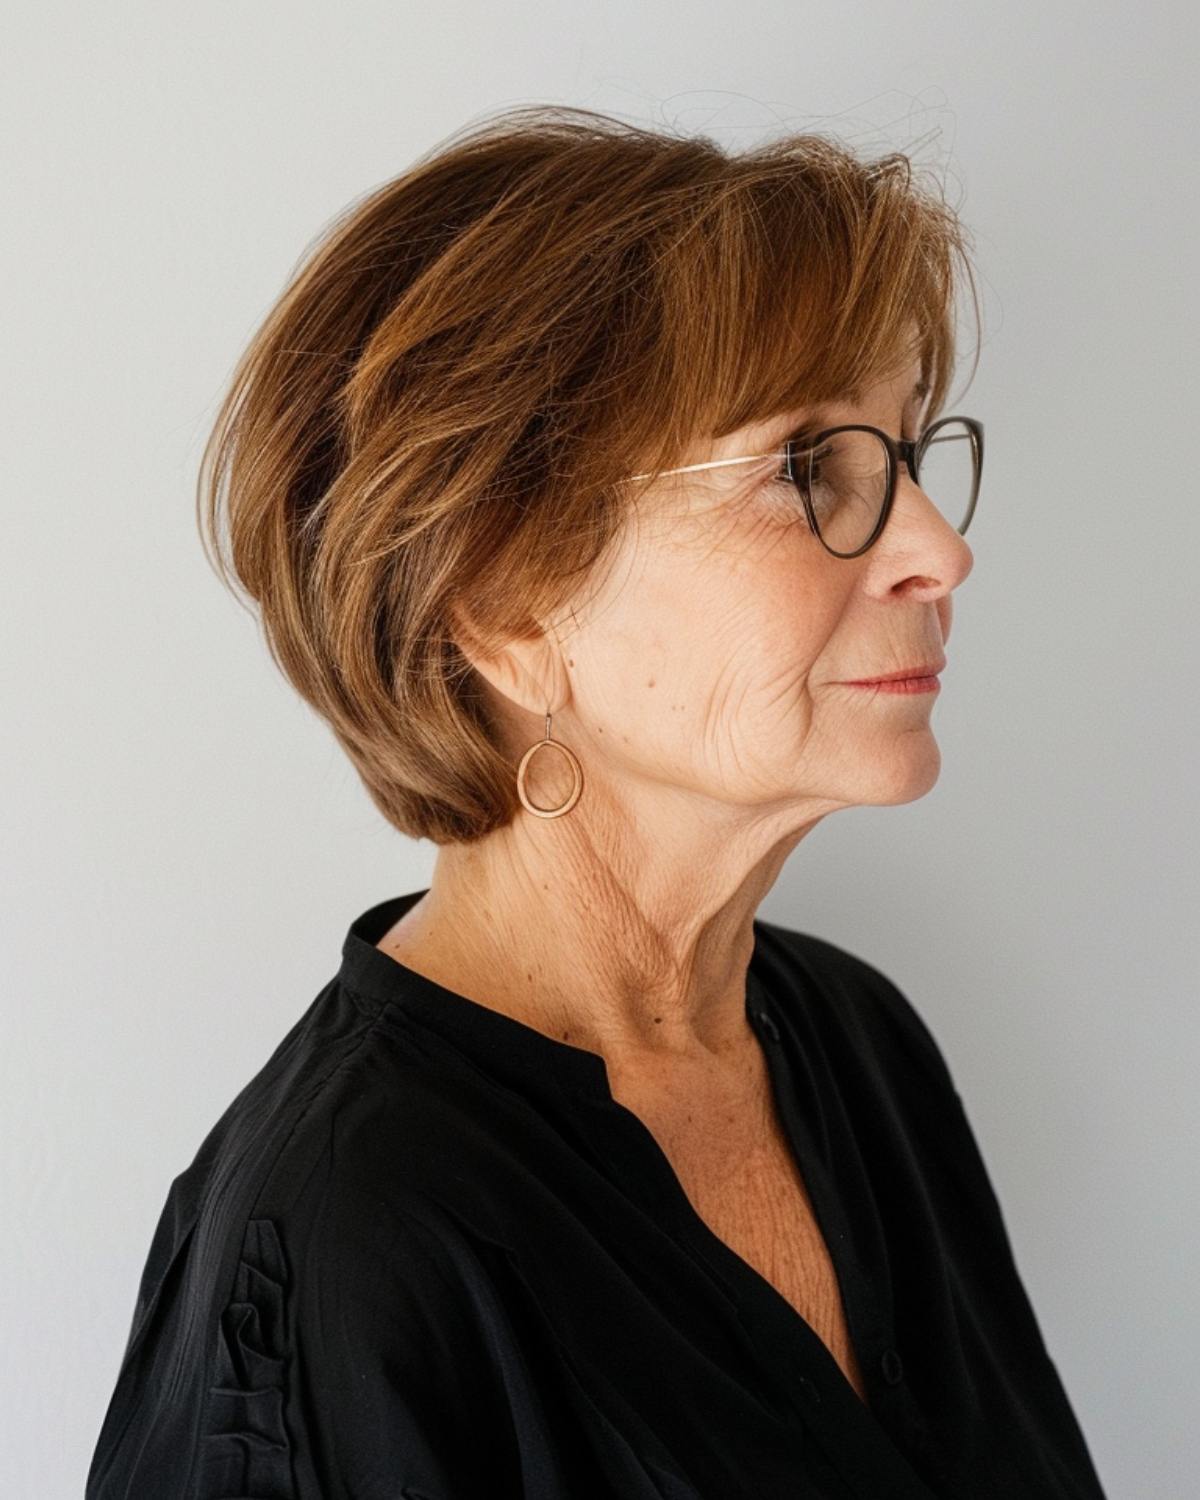 Side profile of a woman with a pixie bob haircut and glasses.